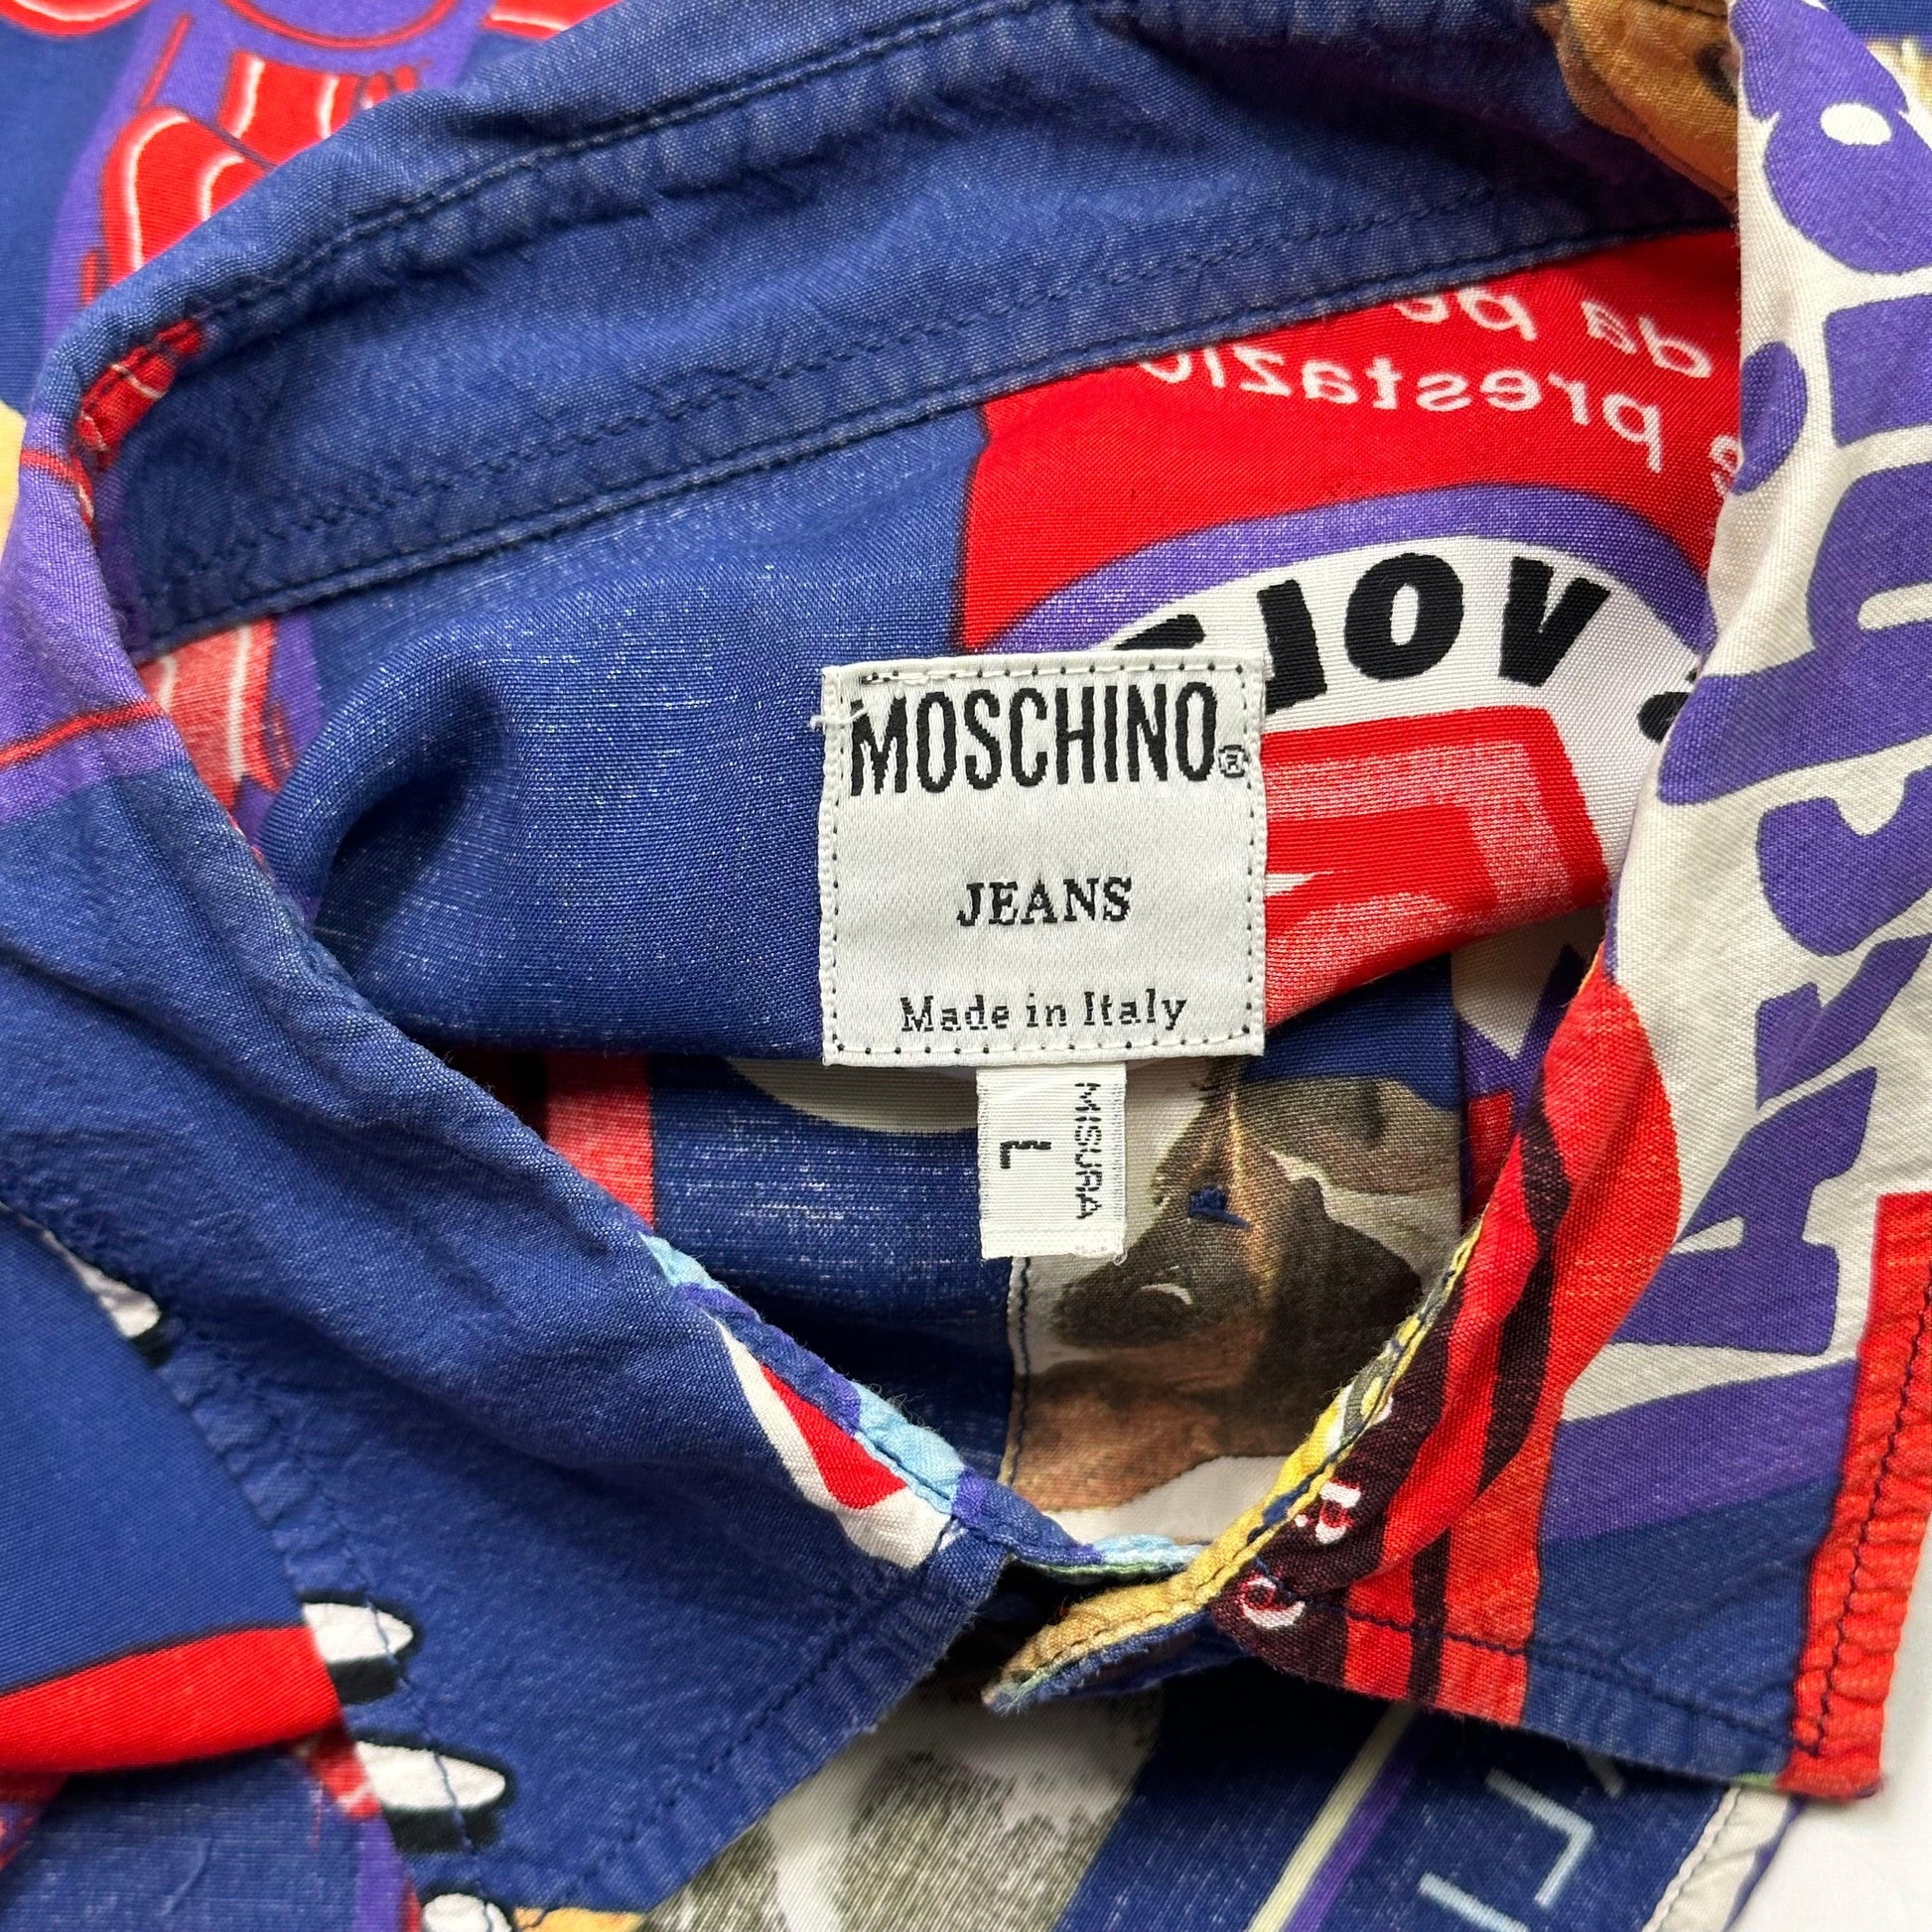 Moschino Jeans 1997 Cats and Dogs Shirt - L - Known Source